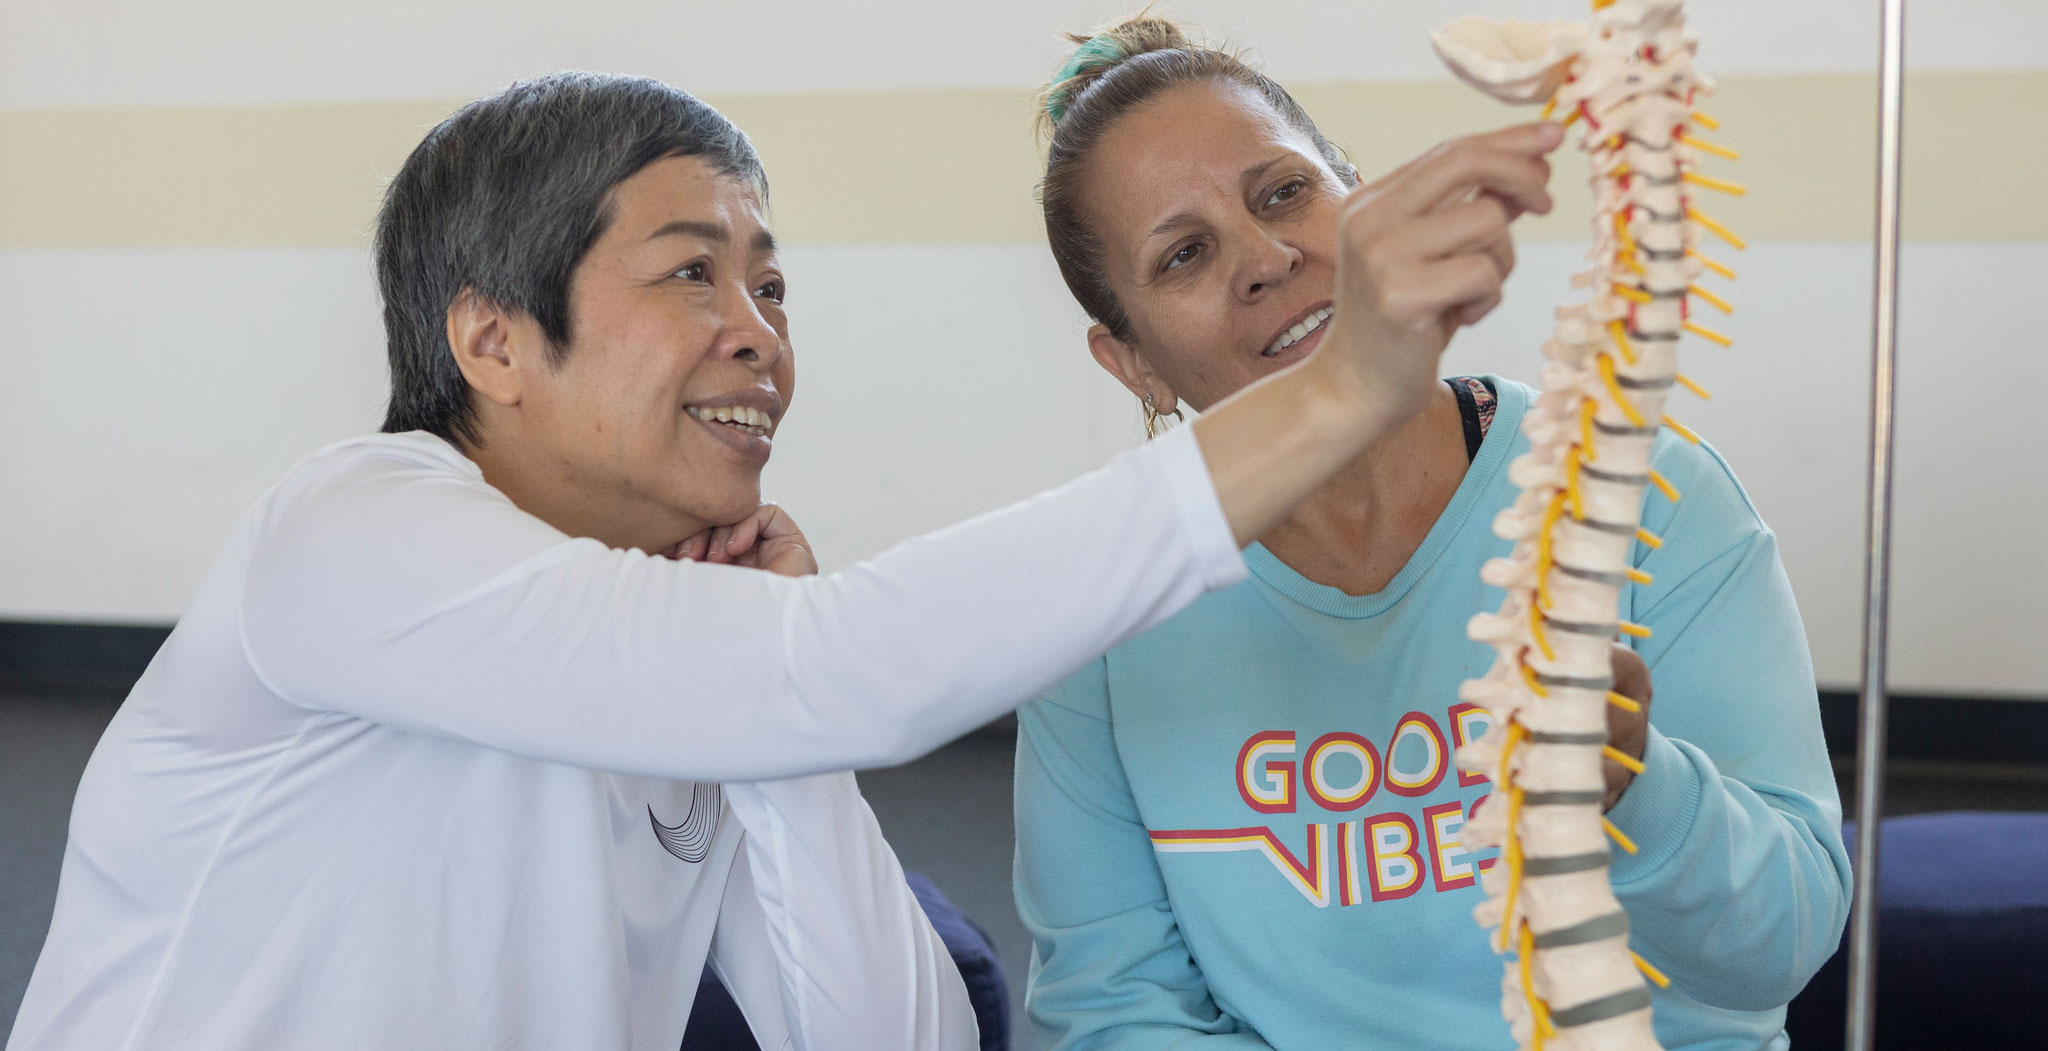 A yoga instructor shows a student a skeletal display of a spine